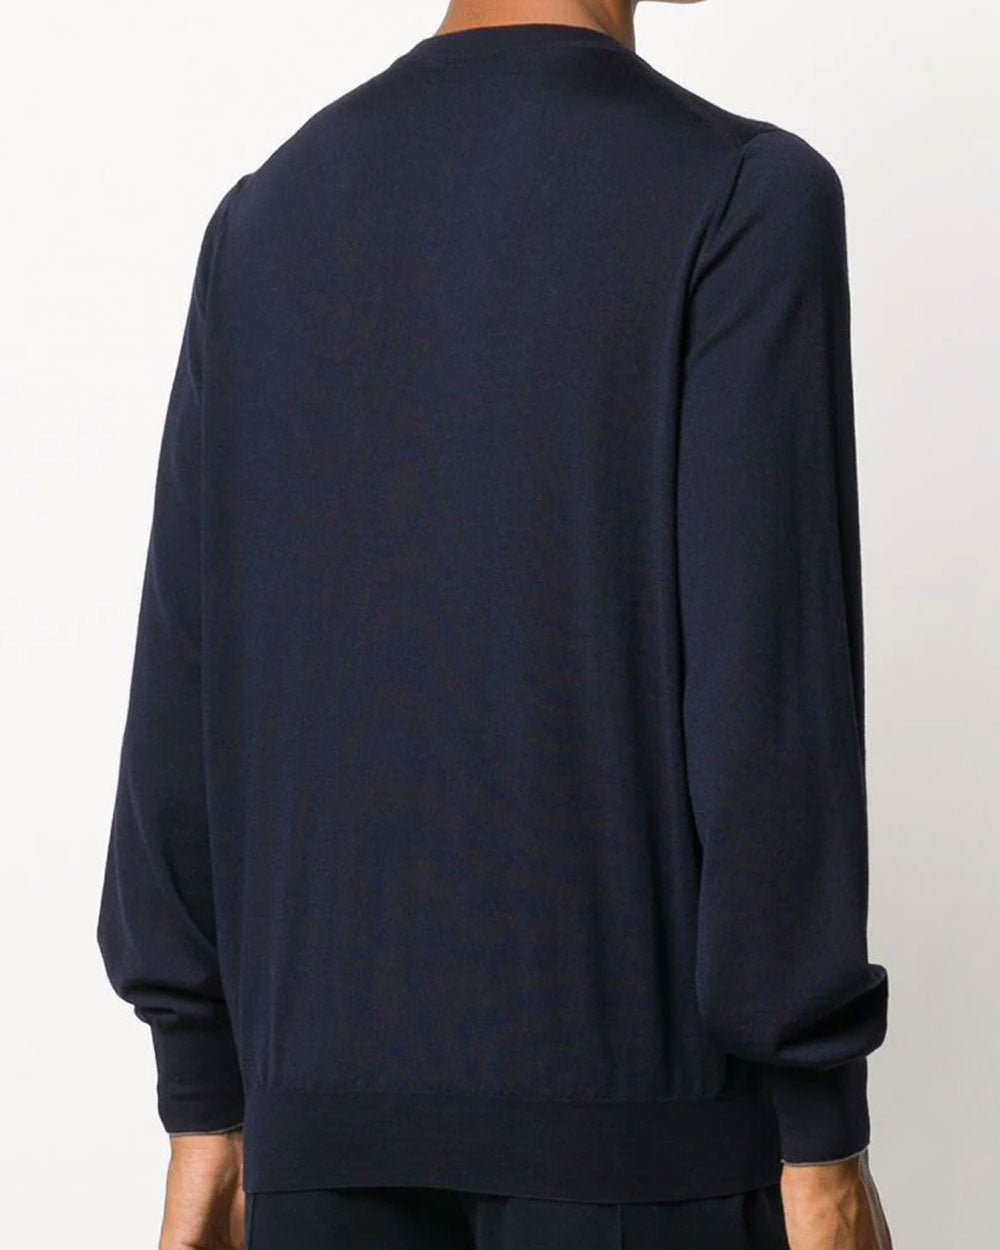 Navy Wool and Cashmere Crewneck Sweater